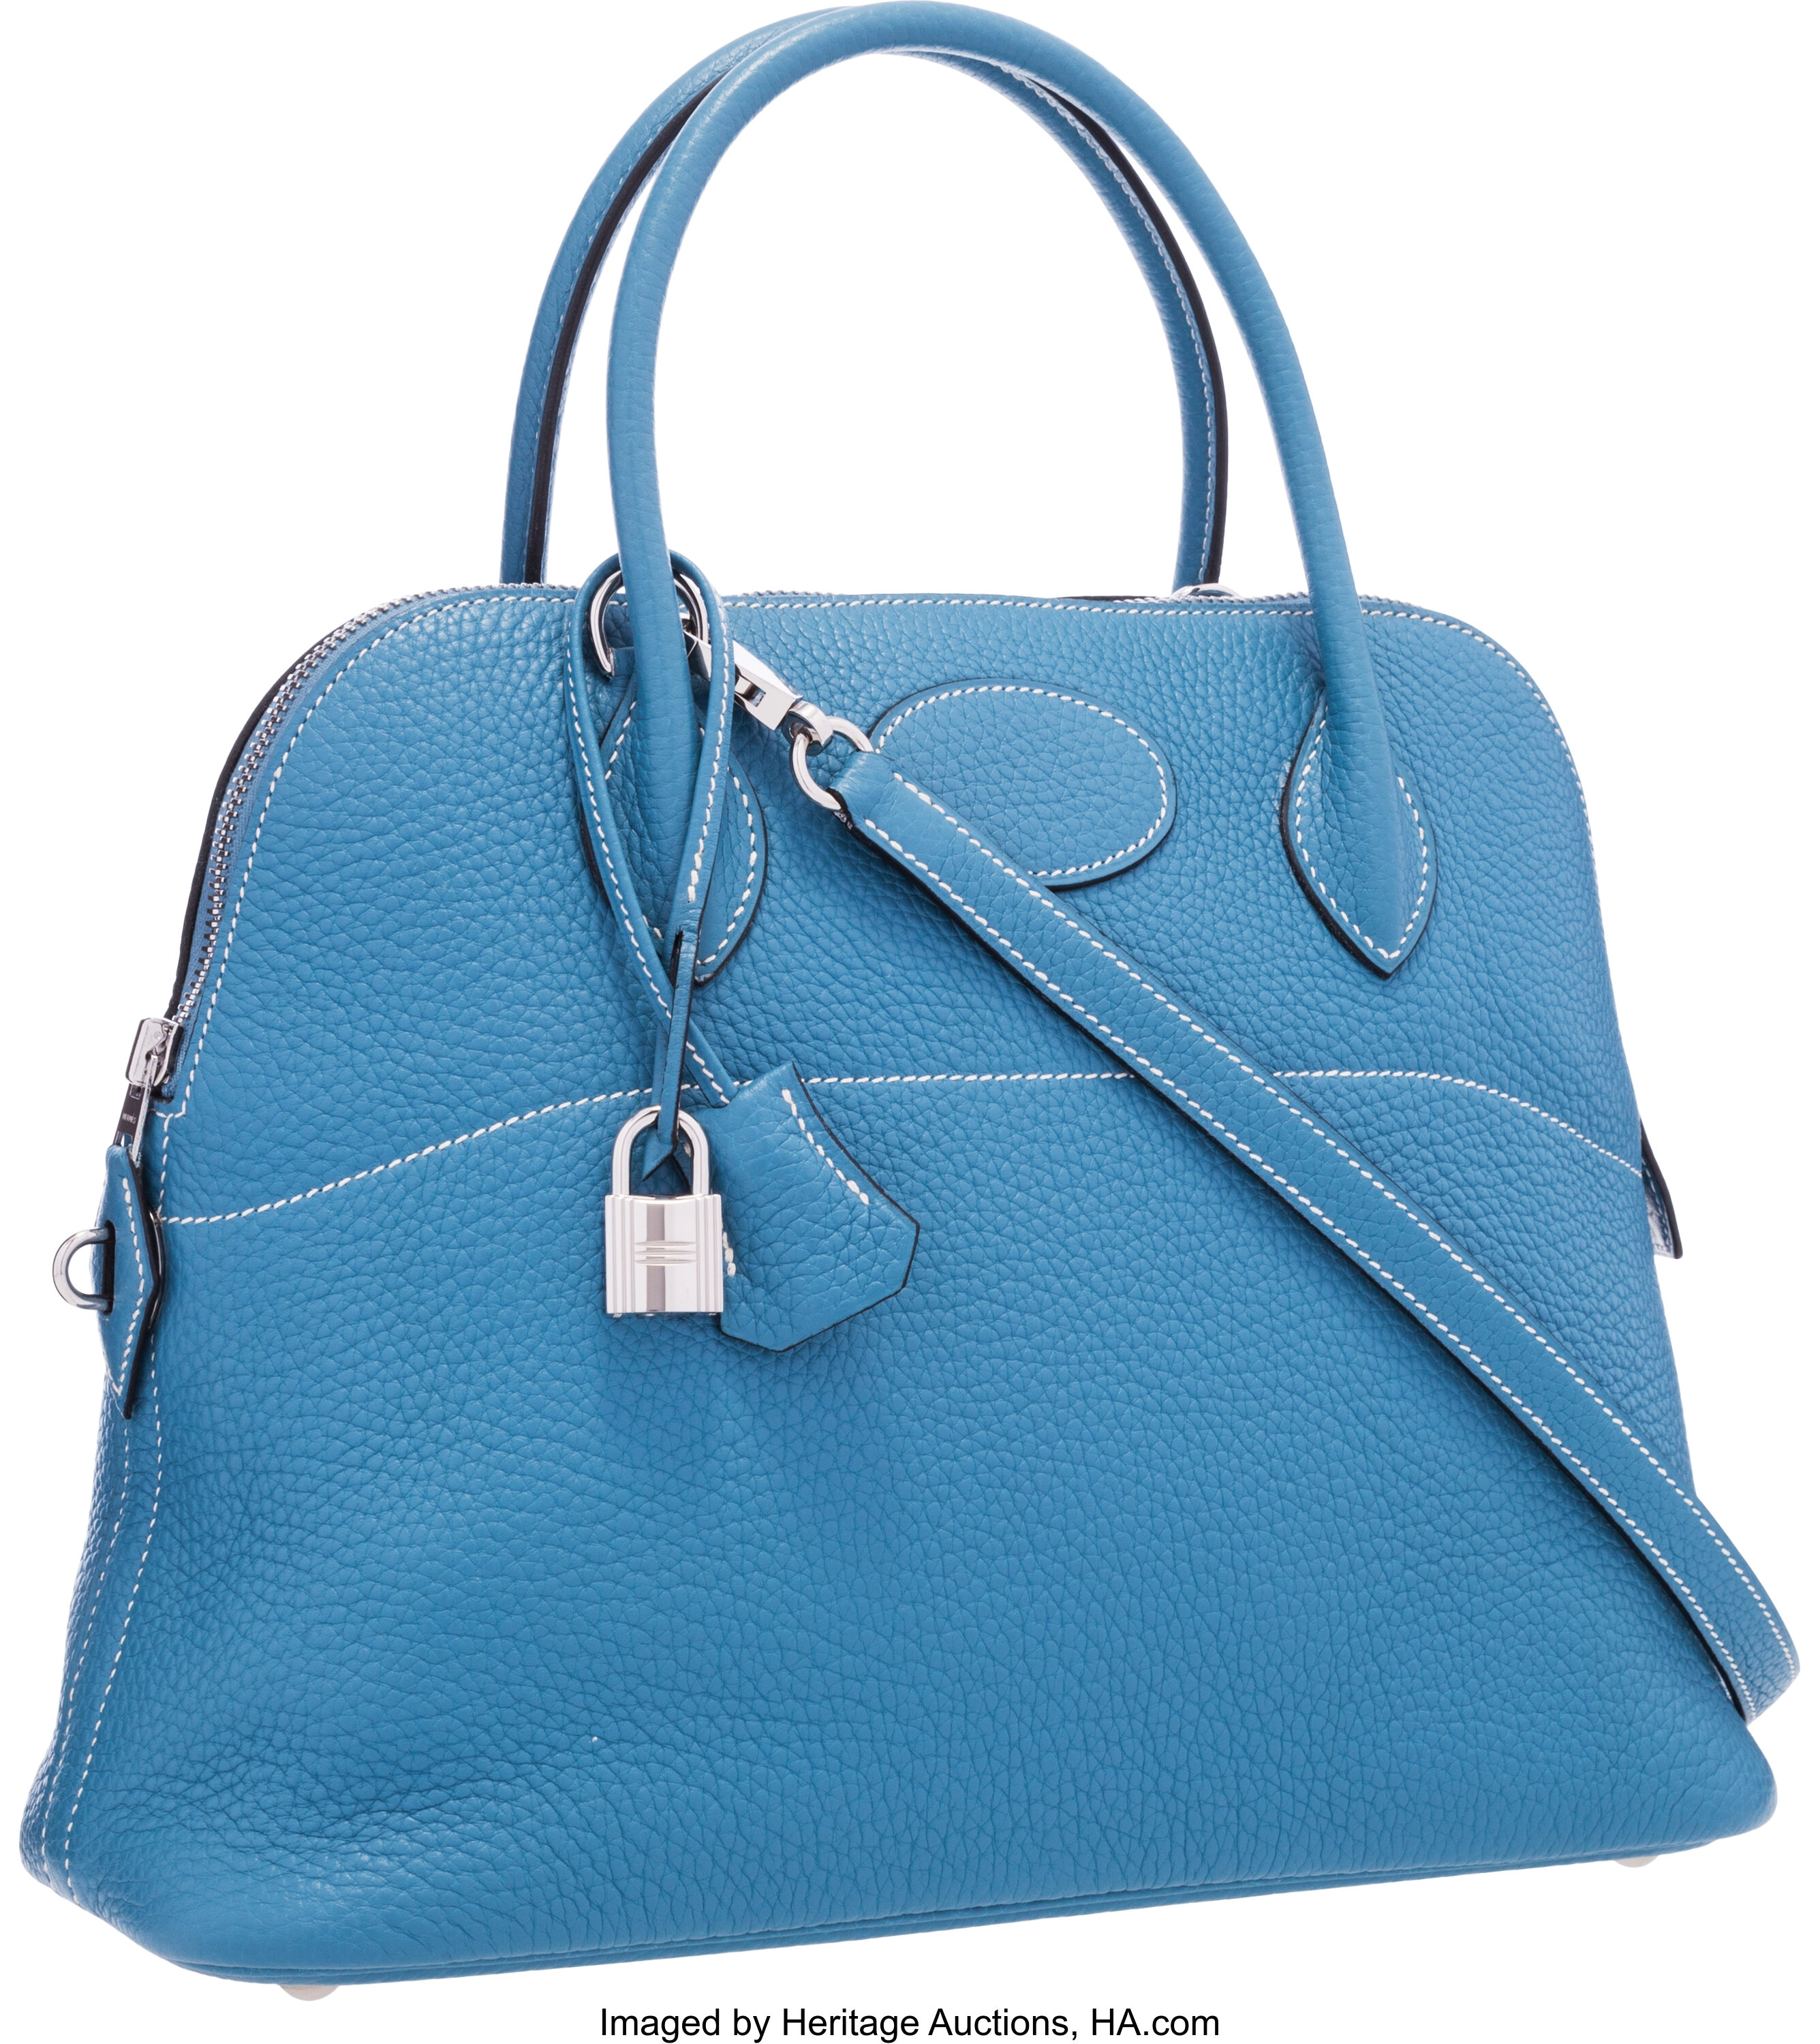 Hermes 31cm Blue Jean Clemence Leather Mou Bolide Bag with | Lot #58027 ...